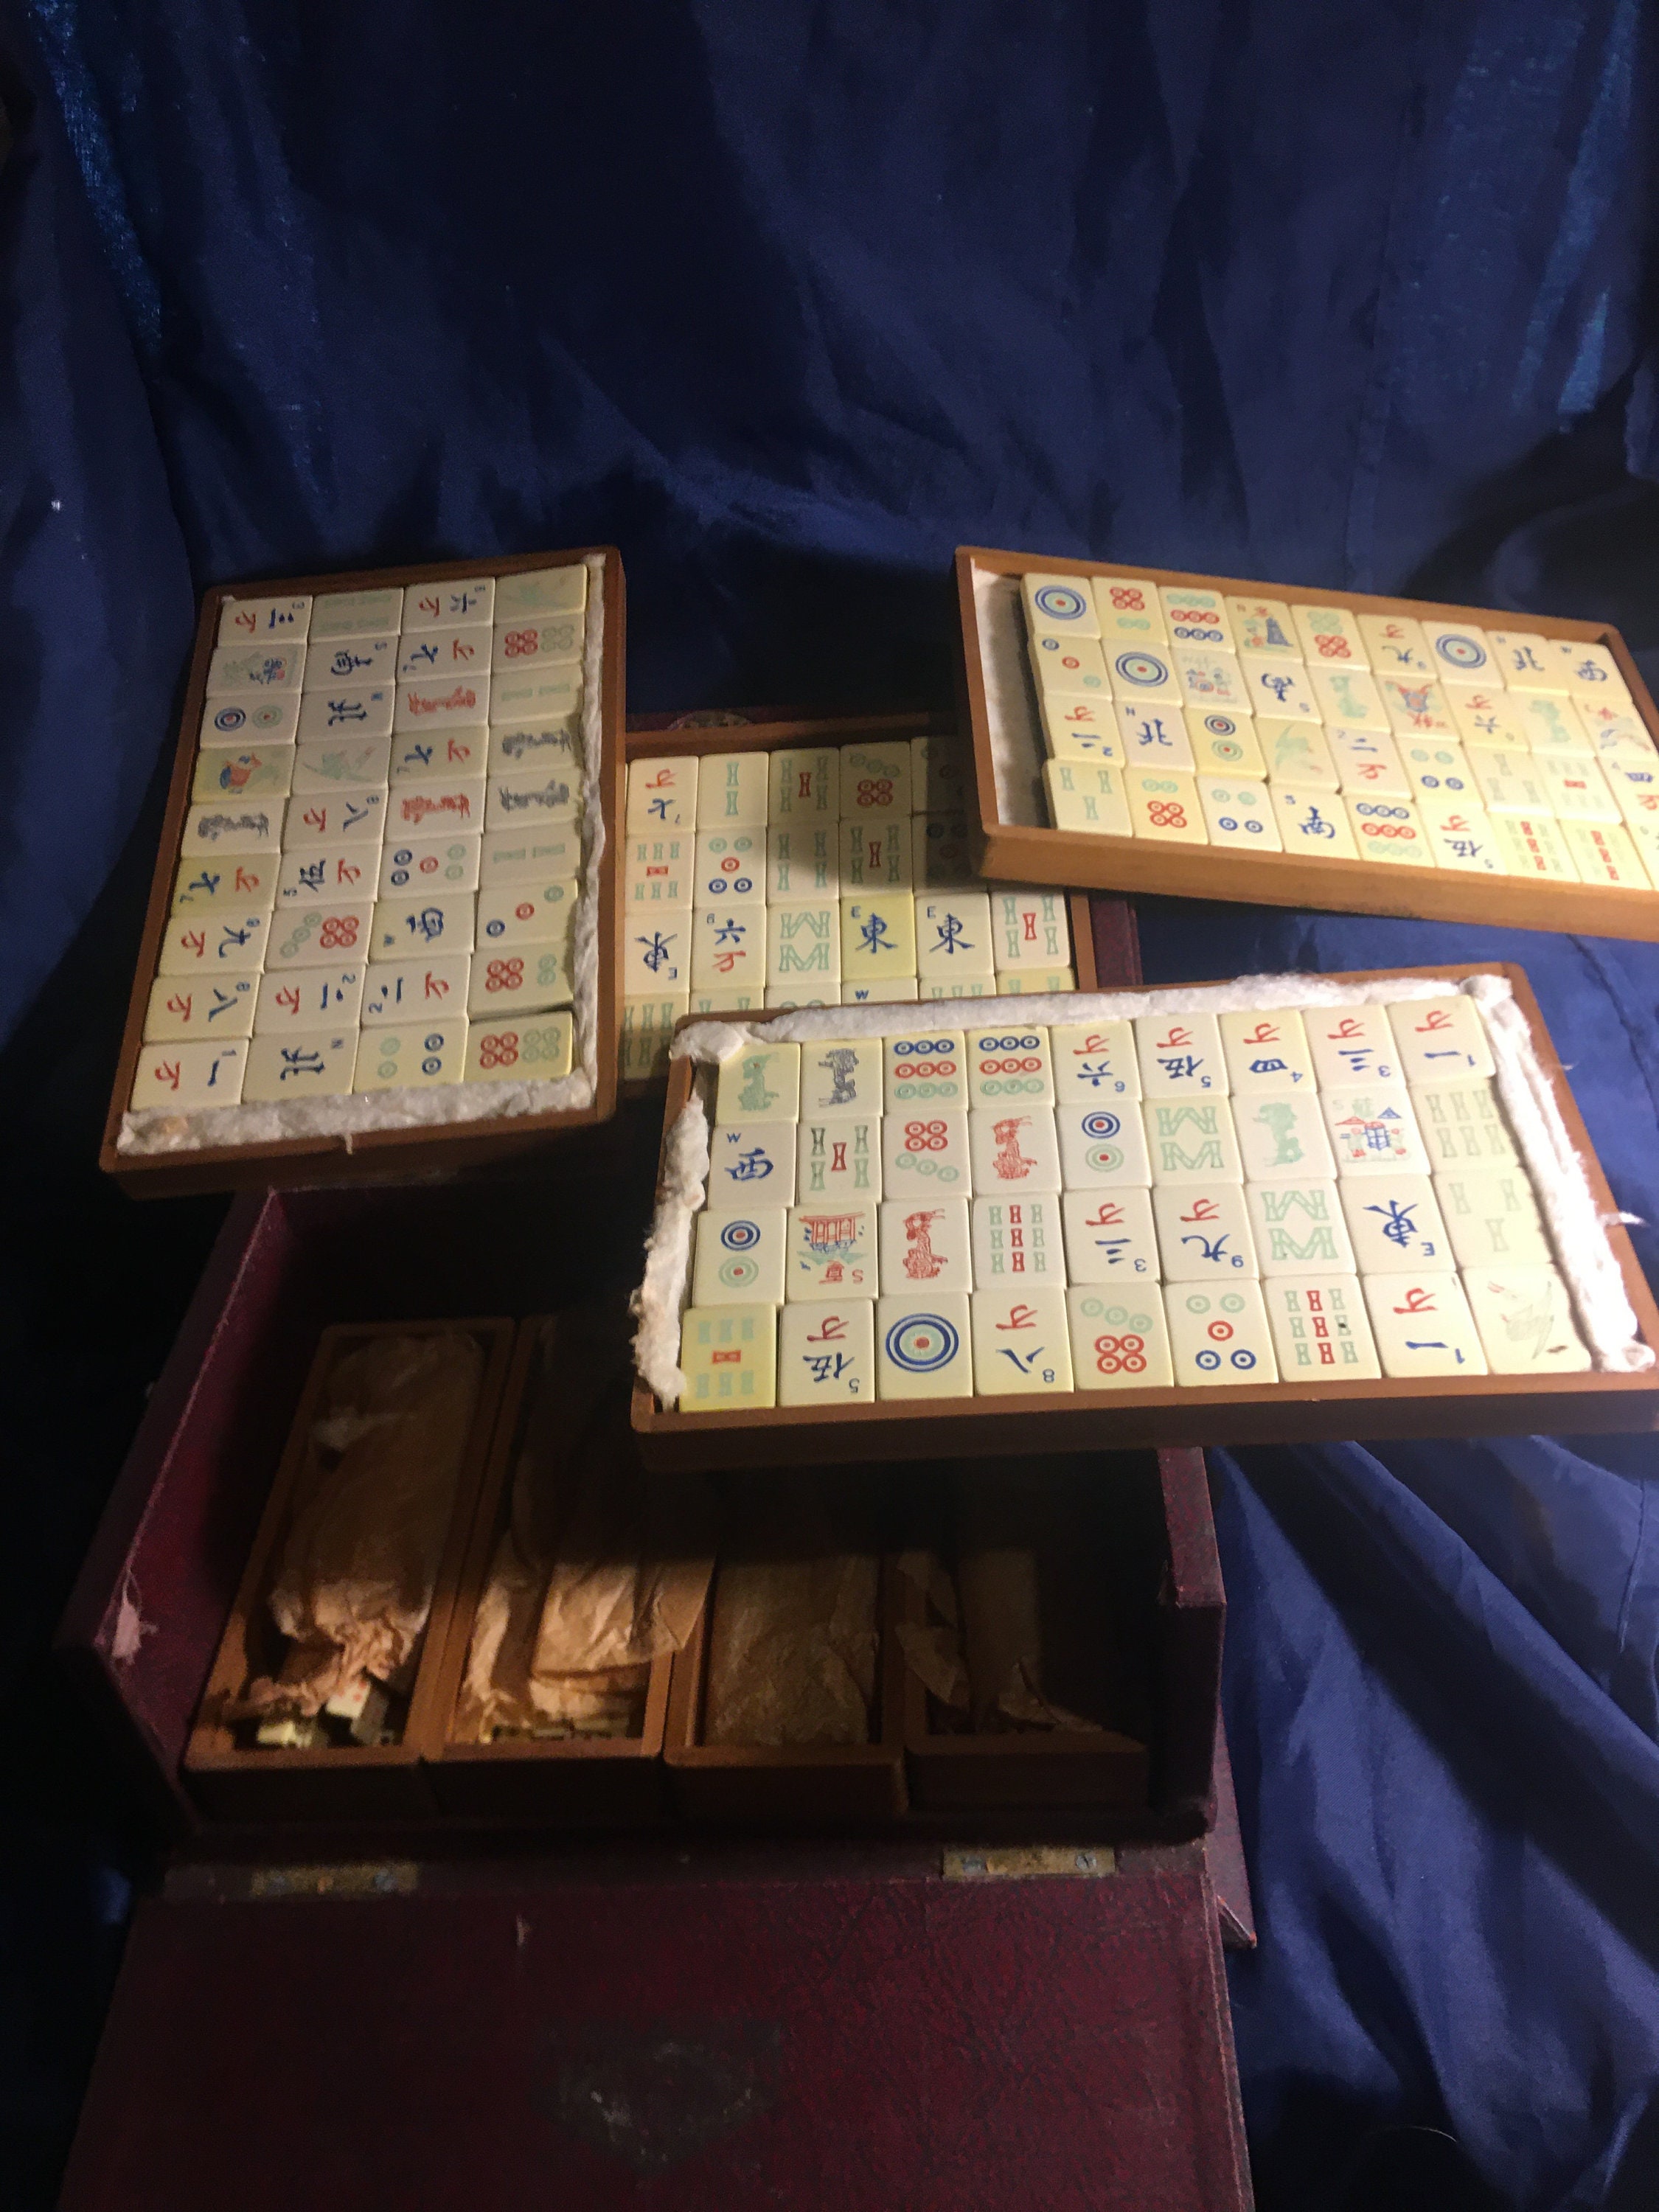 Antique Chinese Mahjong Games Fitted Box Set, circa 1920s at 1stDibs  vintage  mahjong game, vintage mahjong set in wooden box, mahjong set antique